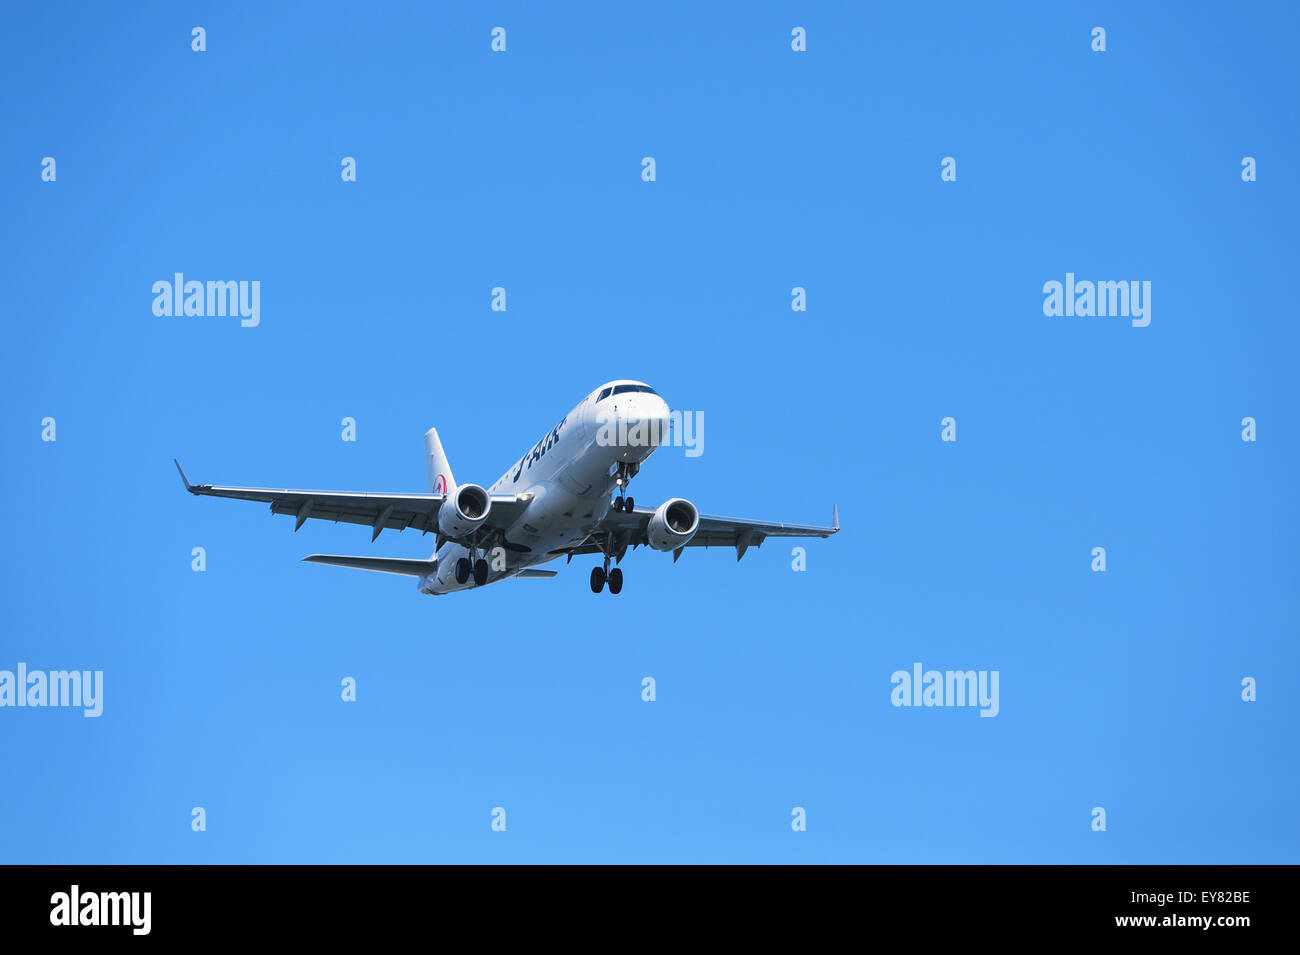 Airplane flying in the sky Stock Photo